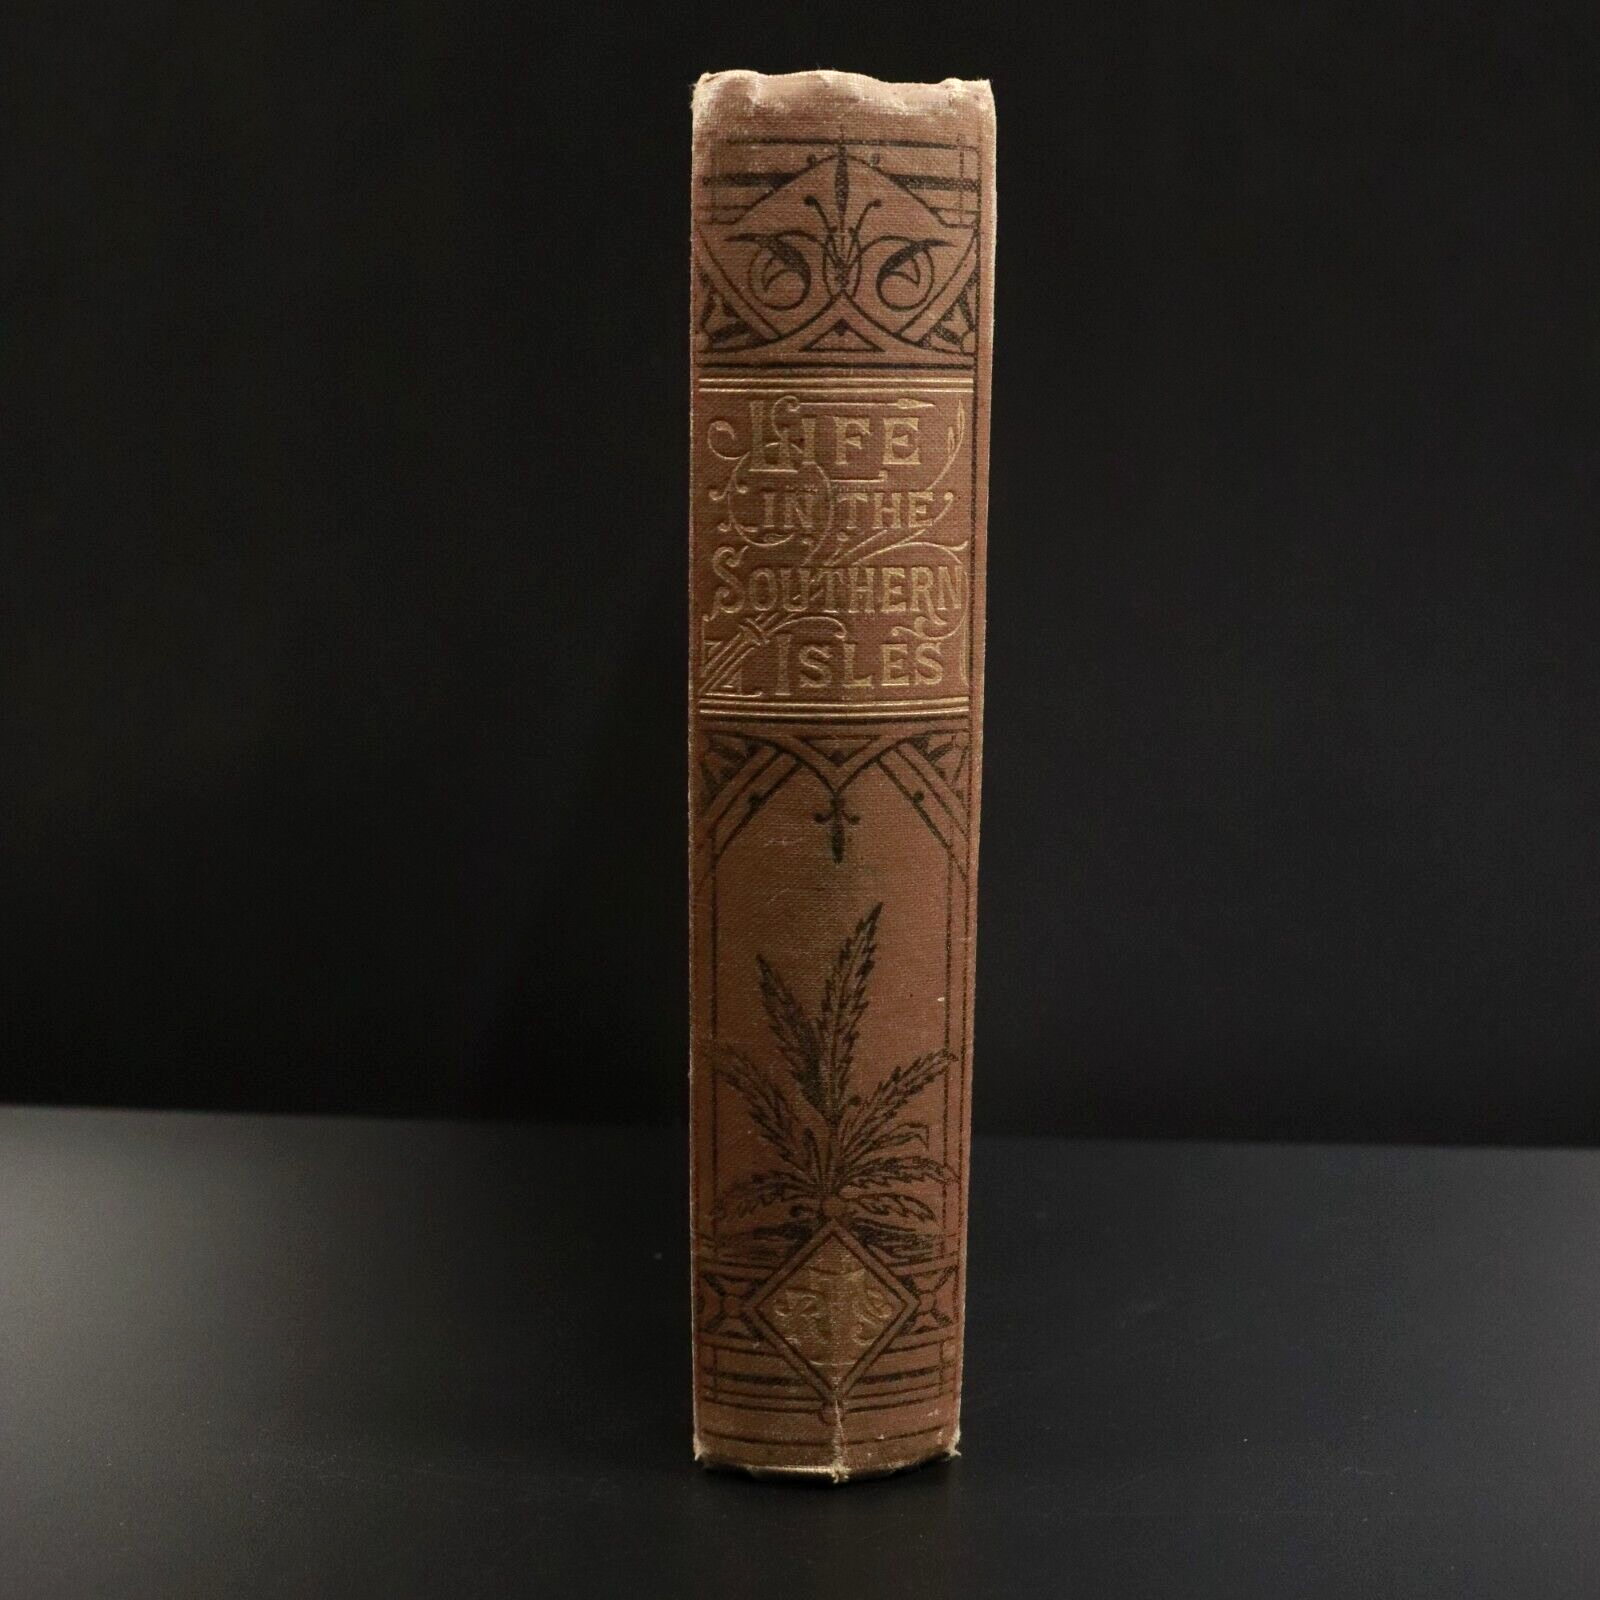 1876 Life In The Southern Isles South Pacific & New Guinea Travel History Book